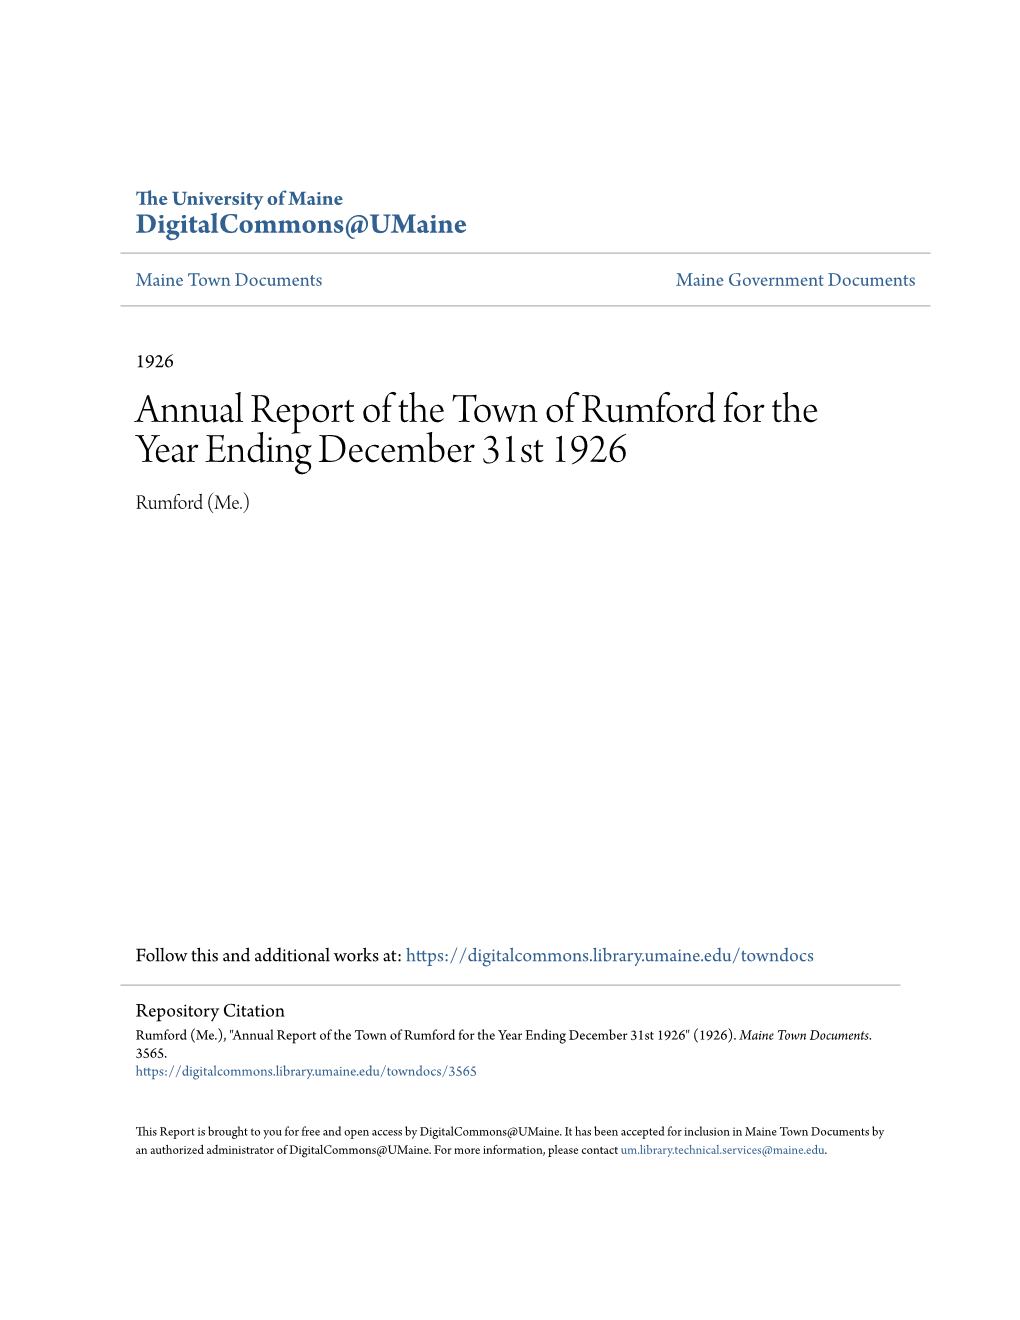 Annual Report of the Town of Rumford for the Year Ending December 31St 1926 Rumford (Me.)